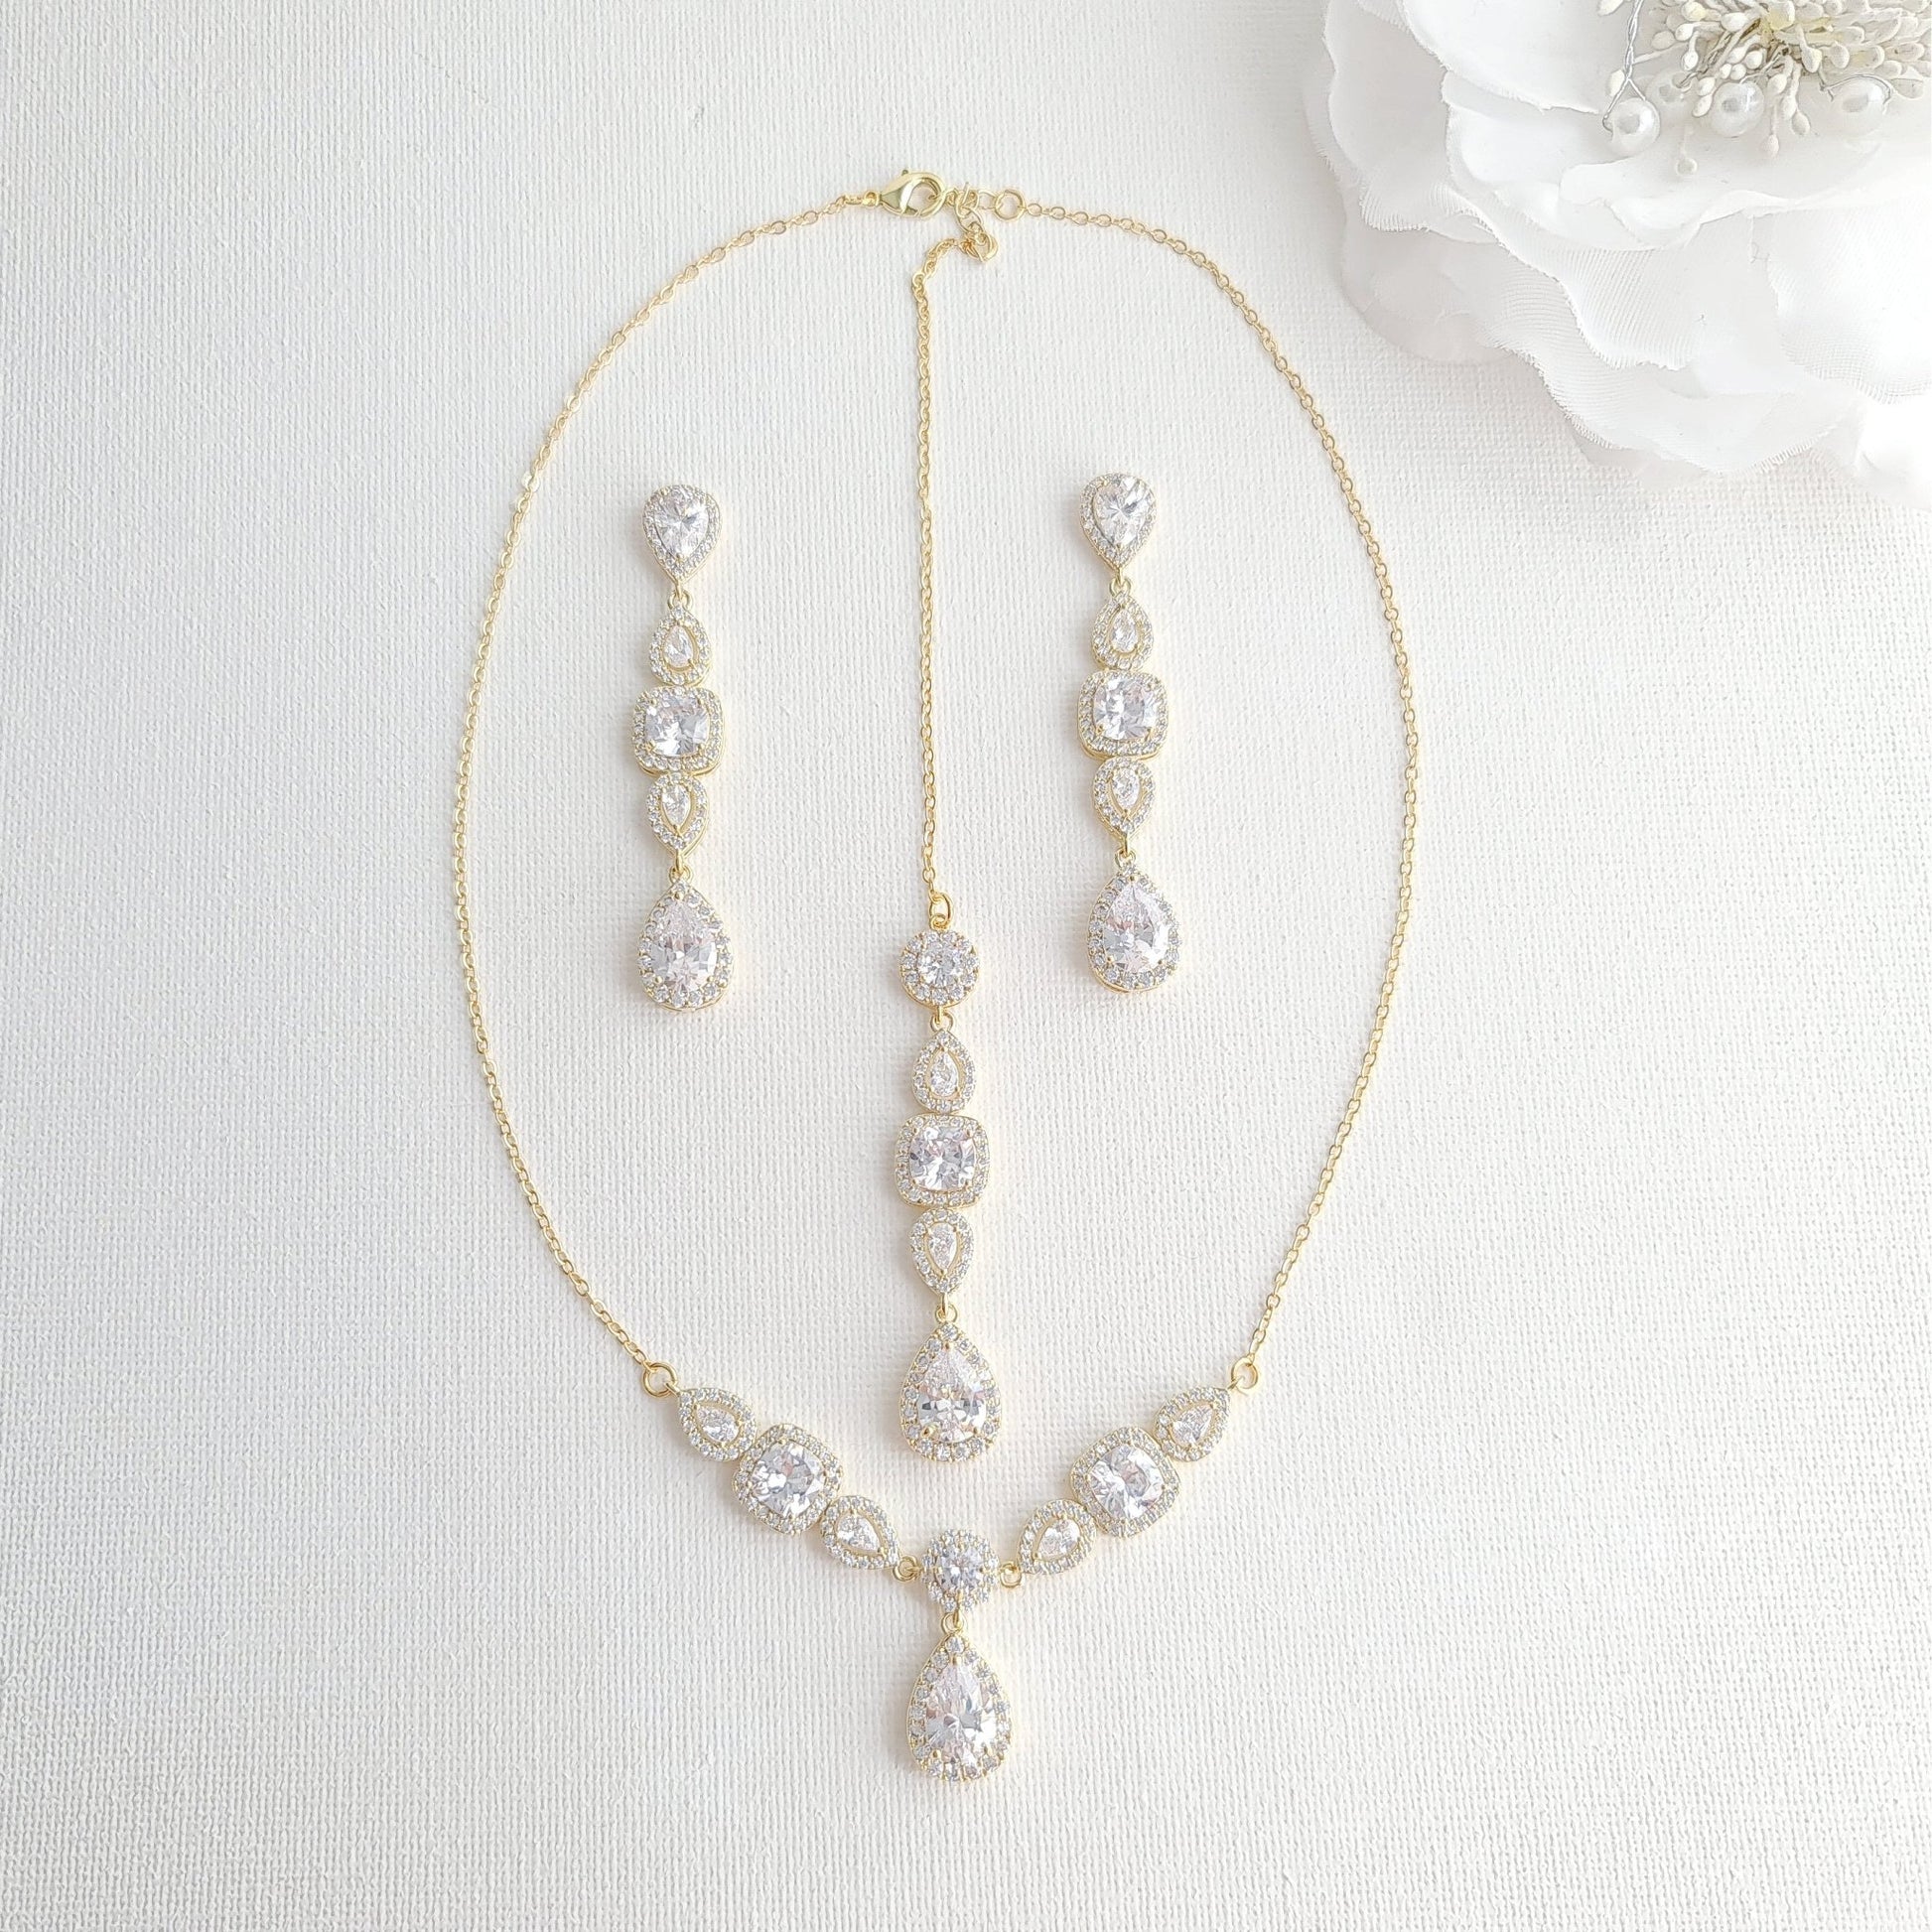 3 Piece Gold Jewelry Set For Brides-Gianna - PoetryDesigns